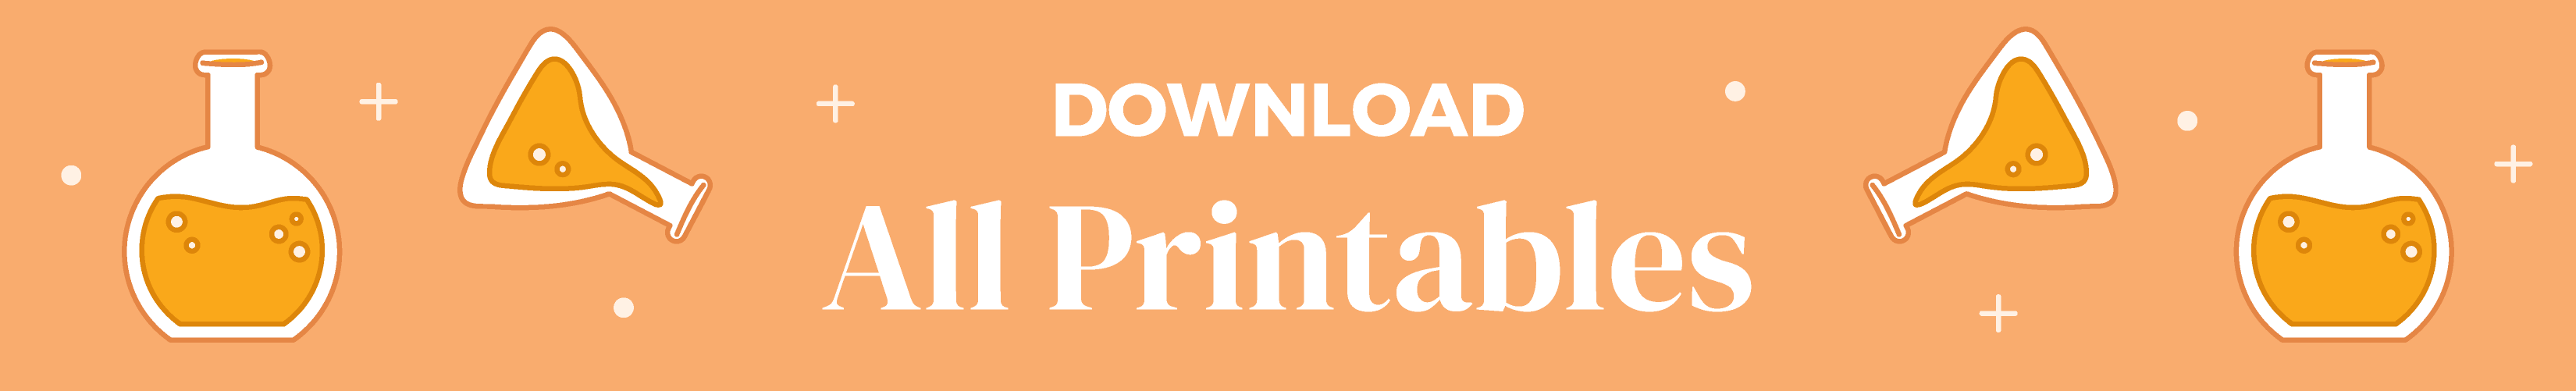 Download all printables